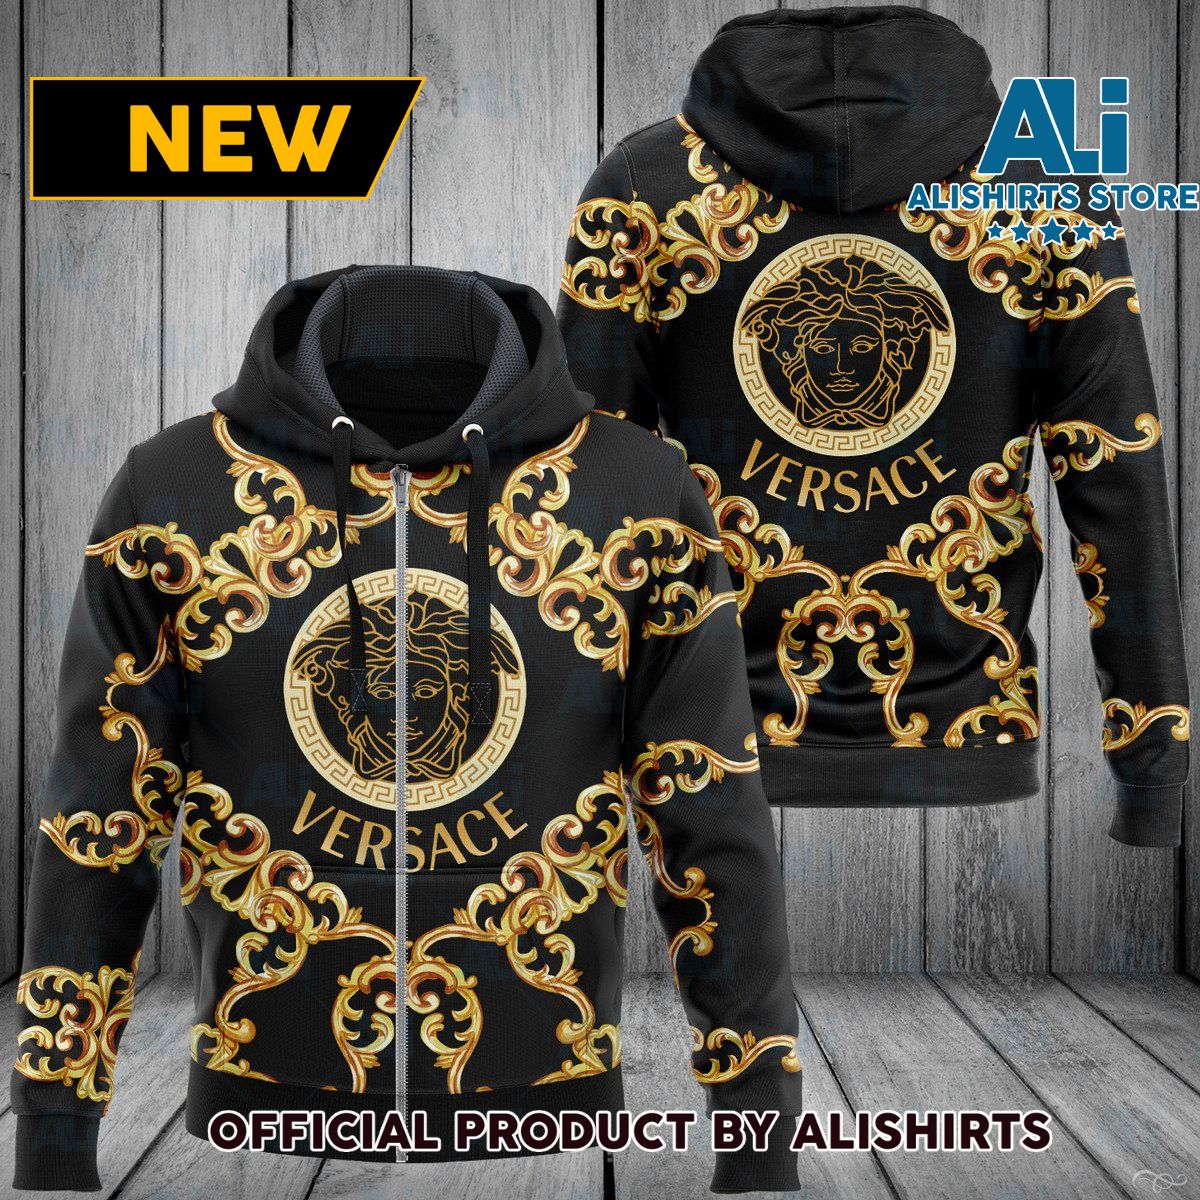 Gianni Versace Italy Hoodie Luxury Brand Outfits